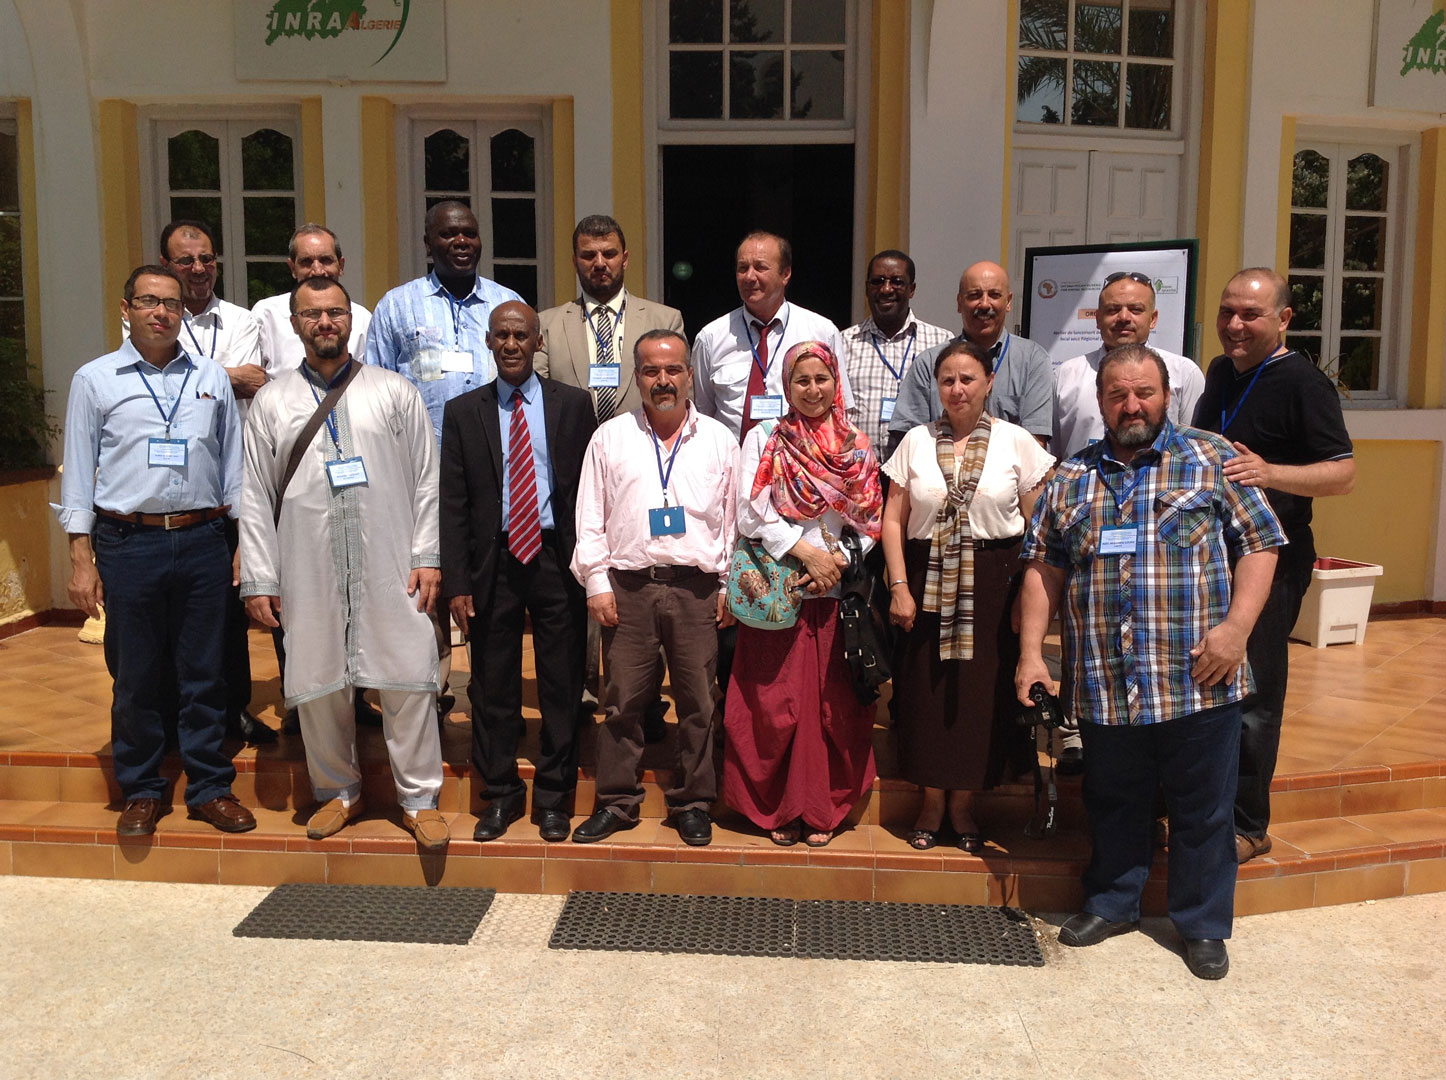 © 2014 AU-IBAR. Group photo of all the participants Workshop "Regional Workshop on the Establishment of the Sub-Regional Focal Point for Animal Genetic Resources for North Africa".